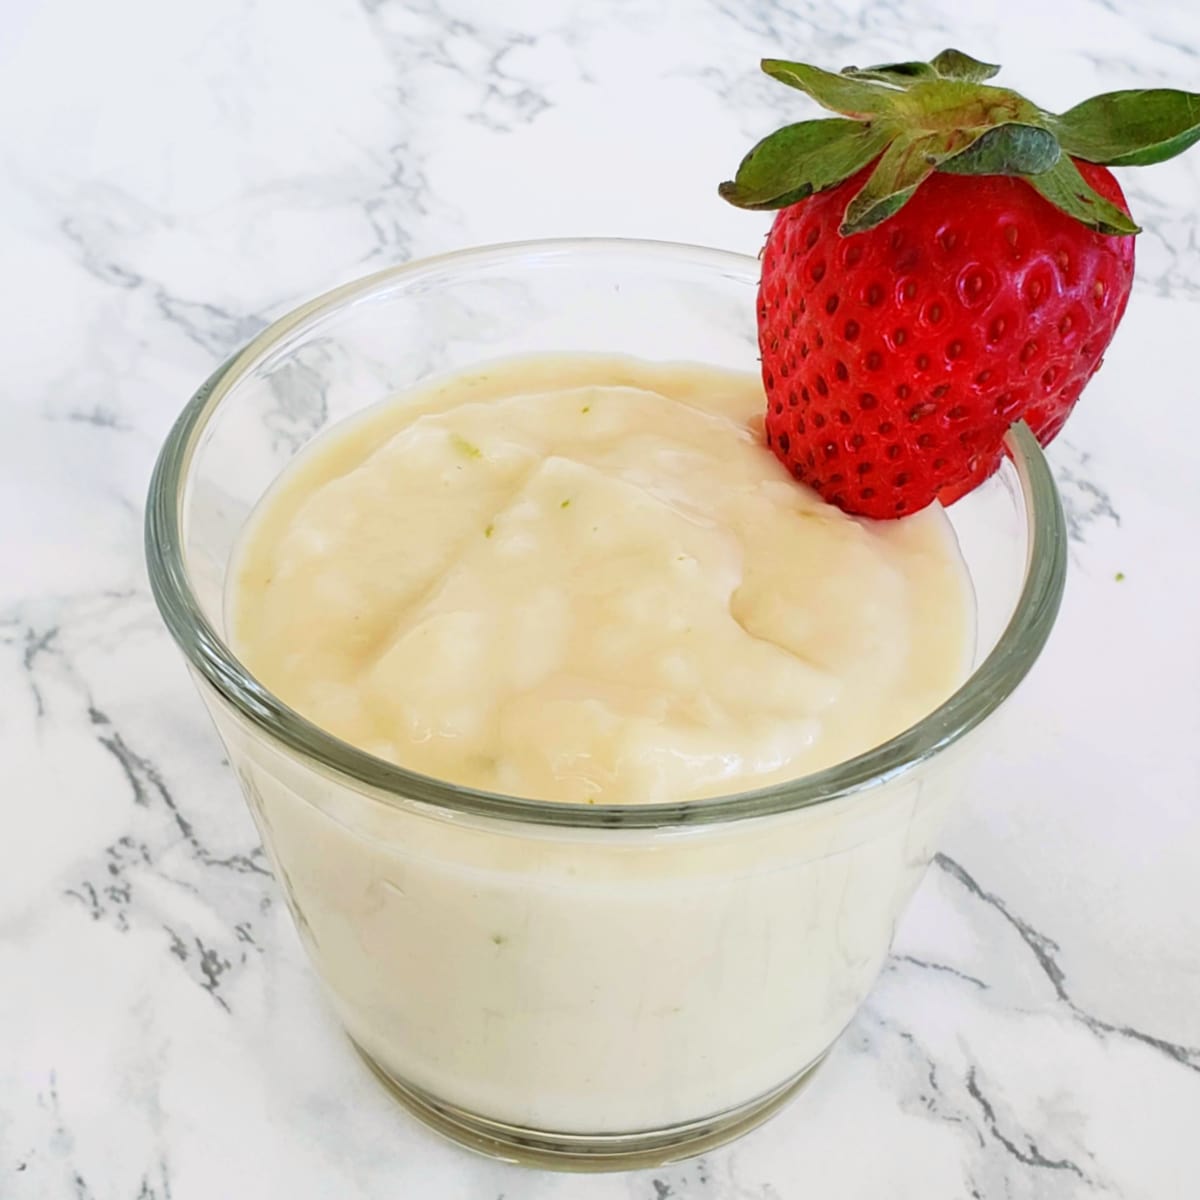 Coconut Pudding in a glass cup with a strawberry perched on the edge, on a white marble counter